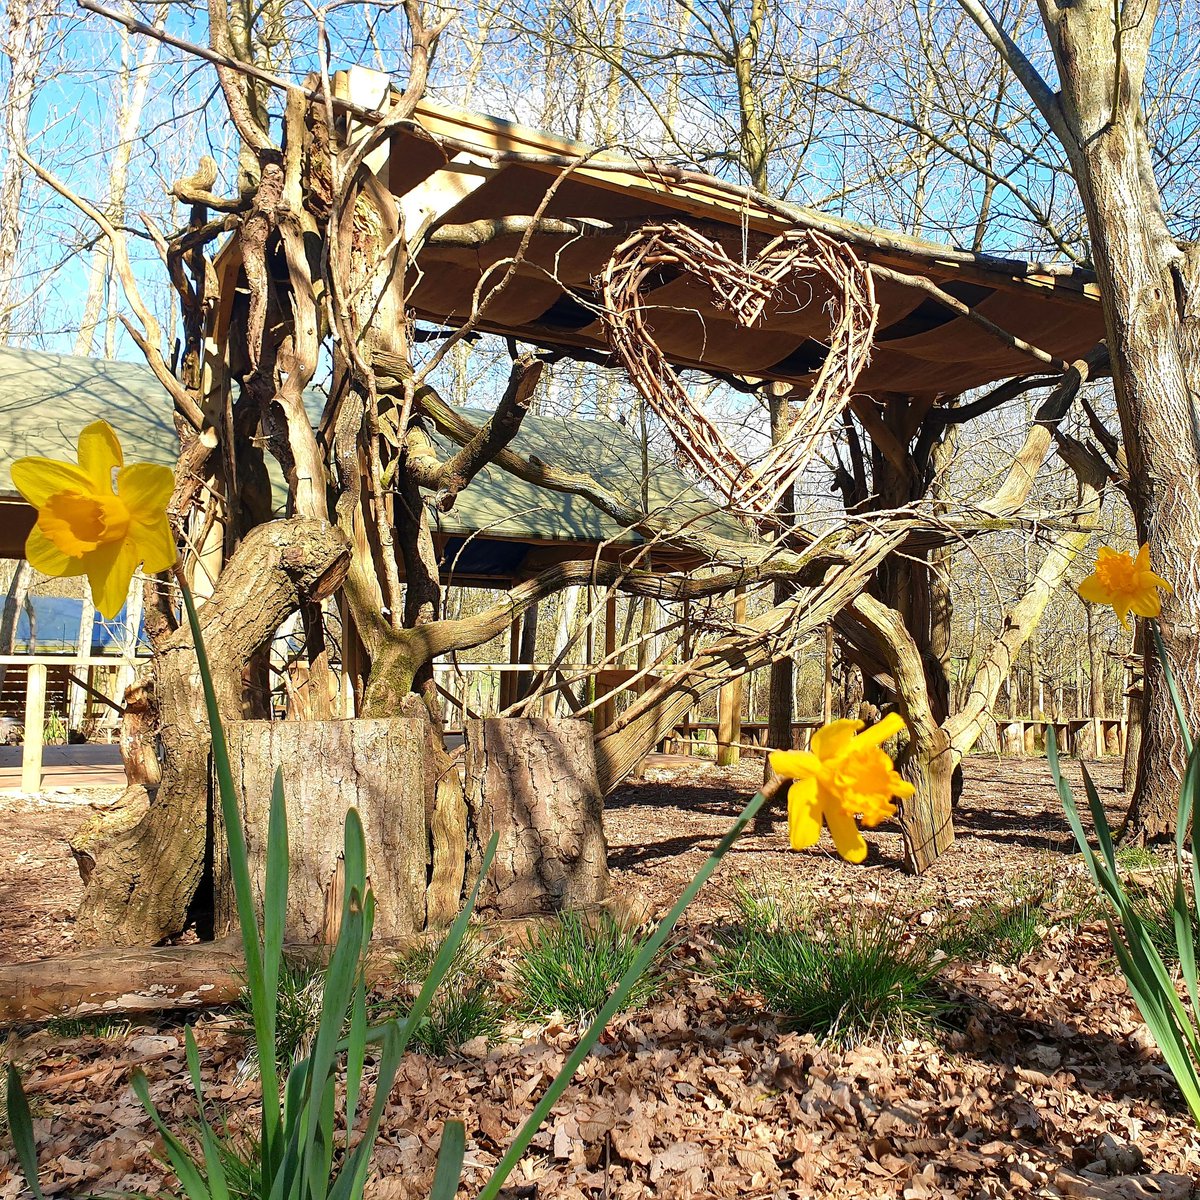 A glorious spring day in our wedding venue, the colours in the sunshine just stunning. #weddingwood #woodlandwedding #woodlandweddings #buckinghamshirewedding